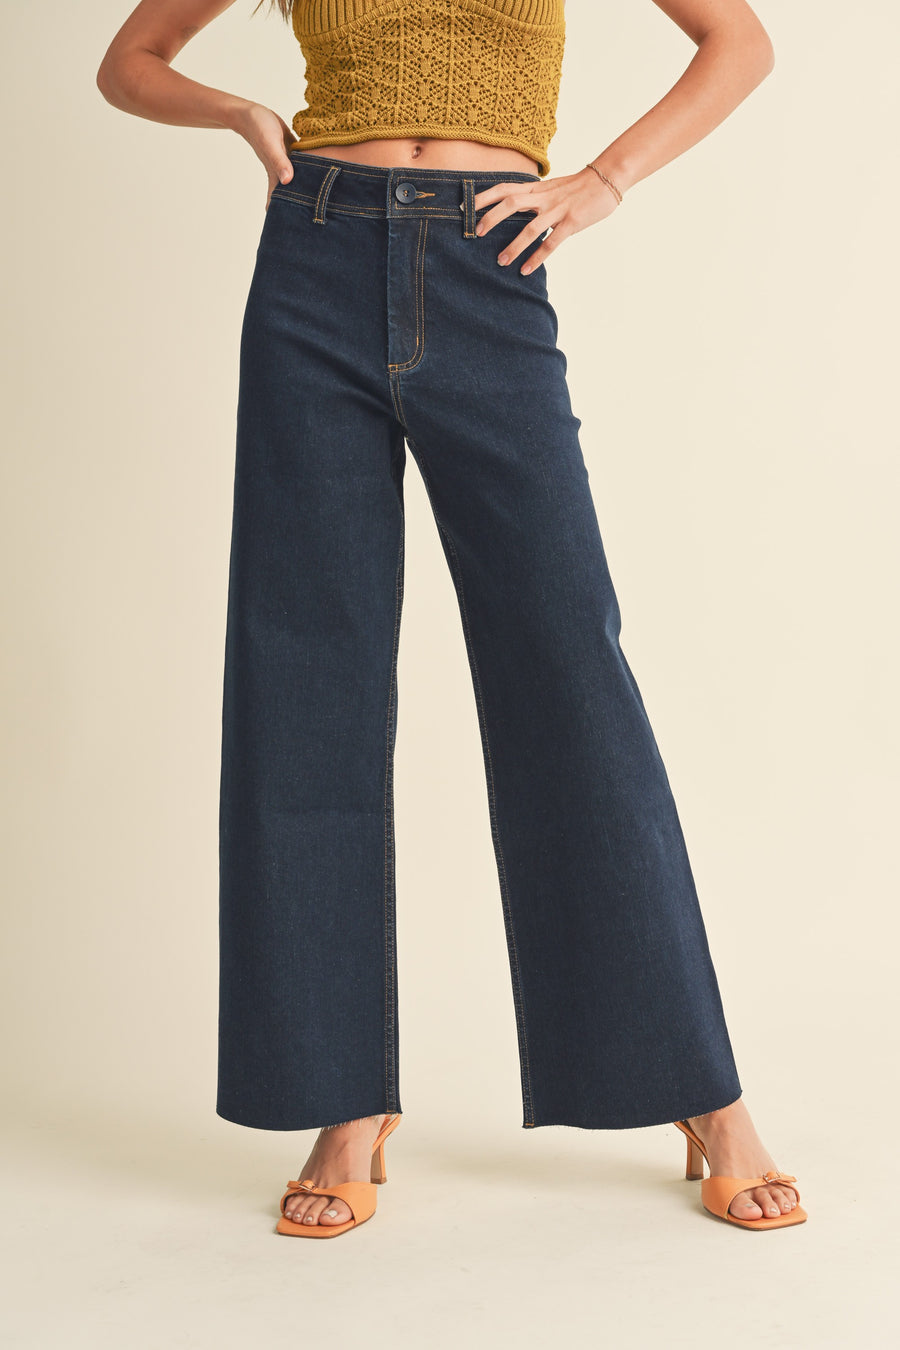  Featuring a wide leg pant with stretched denim in the color indigo